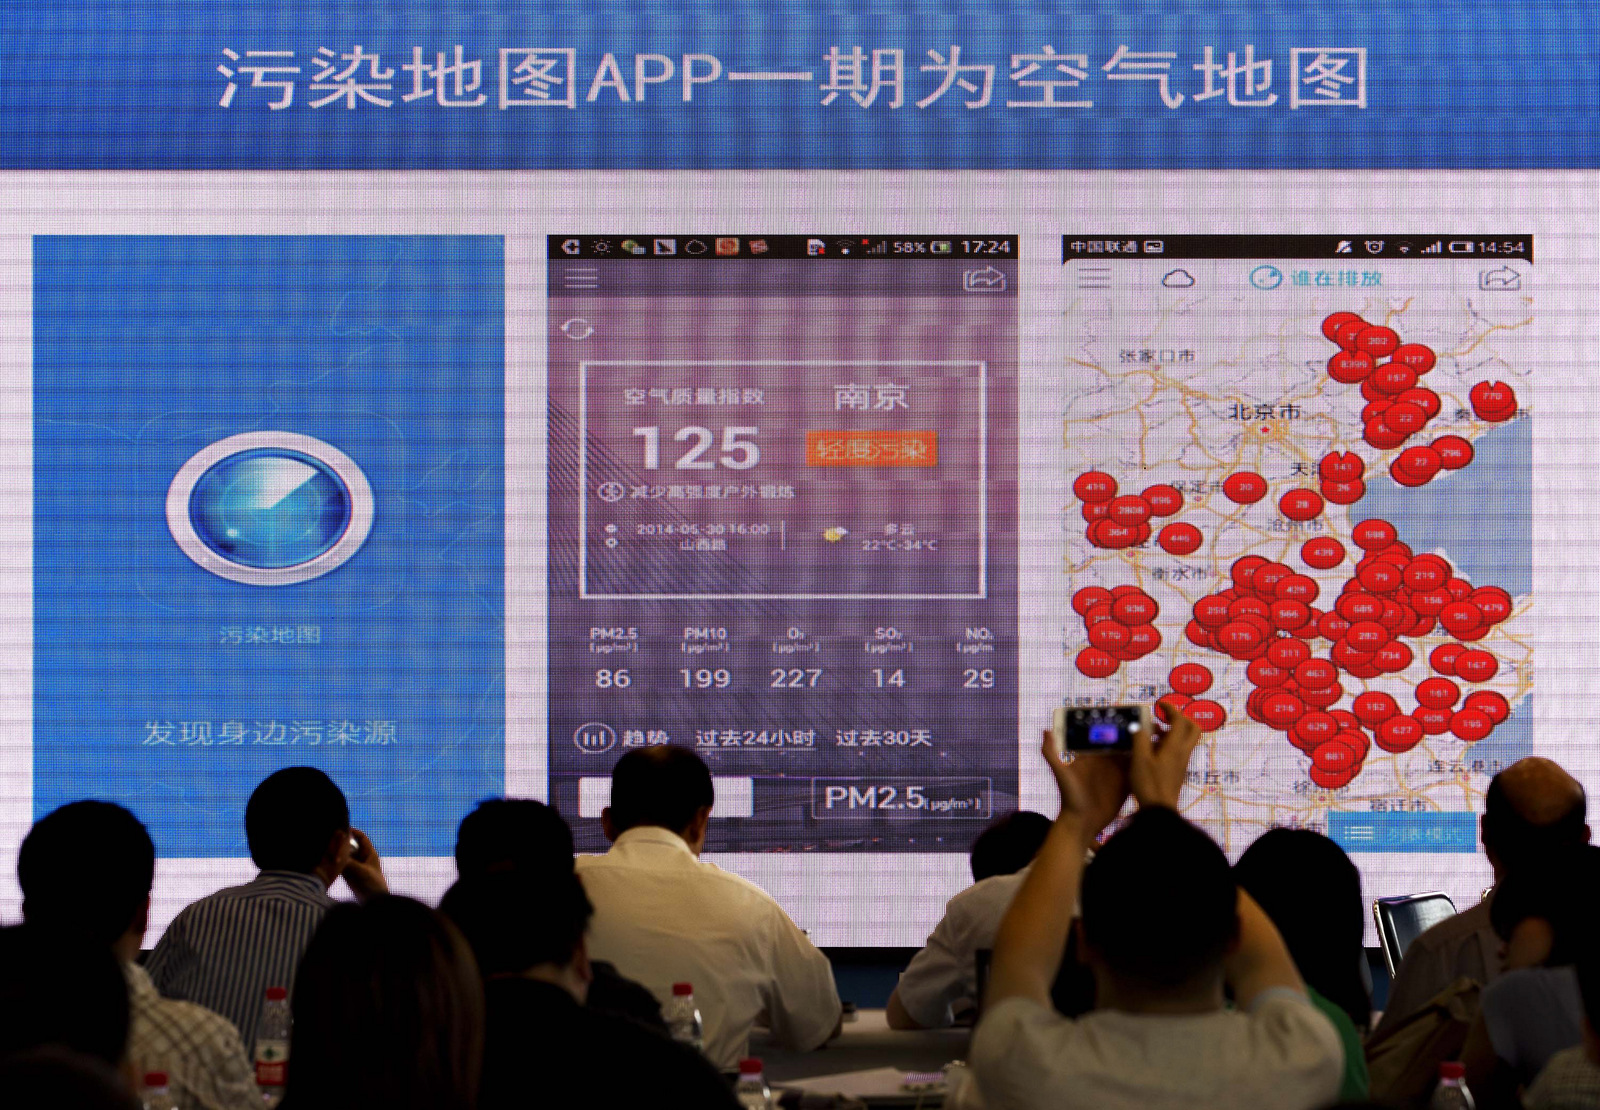 A journalist uses his smartphone to take a photo of a projector screen showing a real-time air quality app, which has bee introduced by Ma Jun, director of Institute of Public and Environmental Affairs after its official launching at the Environmental Protection Bureau in Beijing, China, June 9, 2014. (AP/Andy Wong)